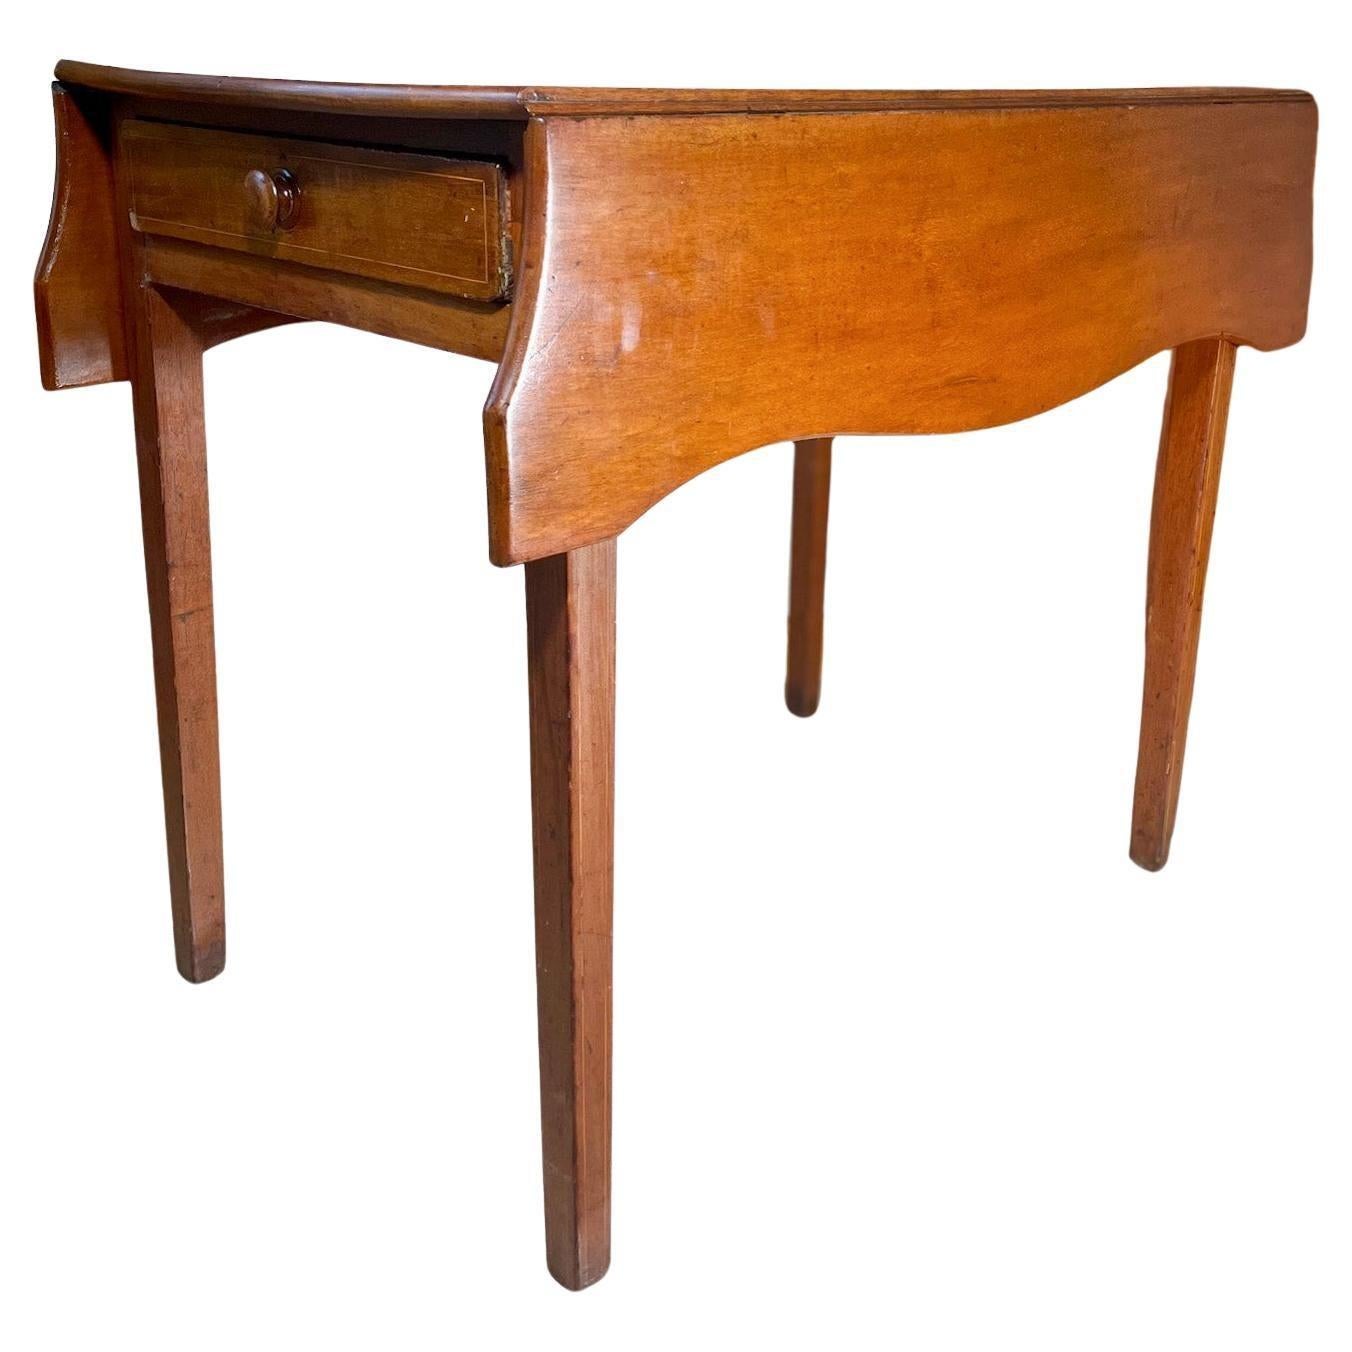 English Hepplewhite Dropleaf Pembroke Side Table.

This early 19th Century dropleaf table with drawer lifts on both sides with butterfly leaf brackets.  A uniquely stylized square tabletop, it stands on four tapered legs highlighted with pinstriping